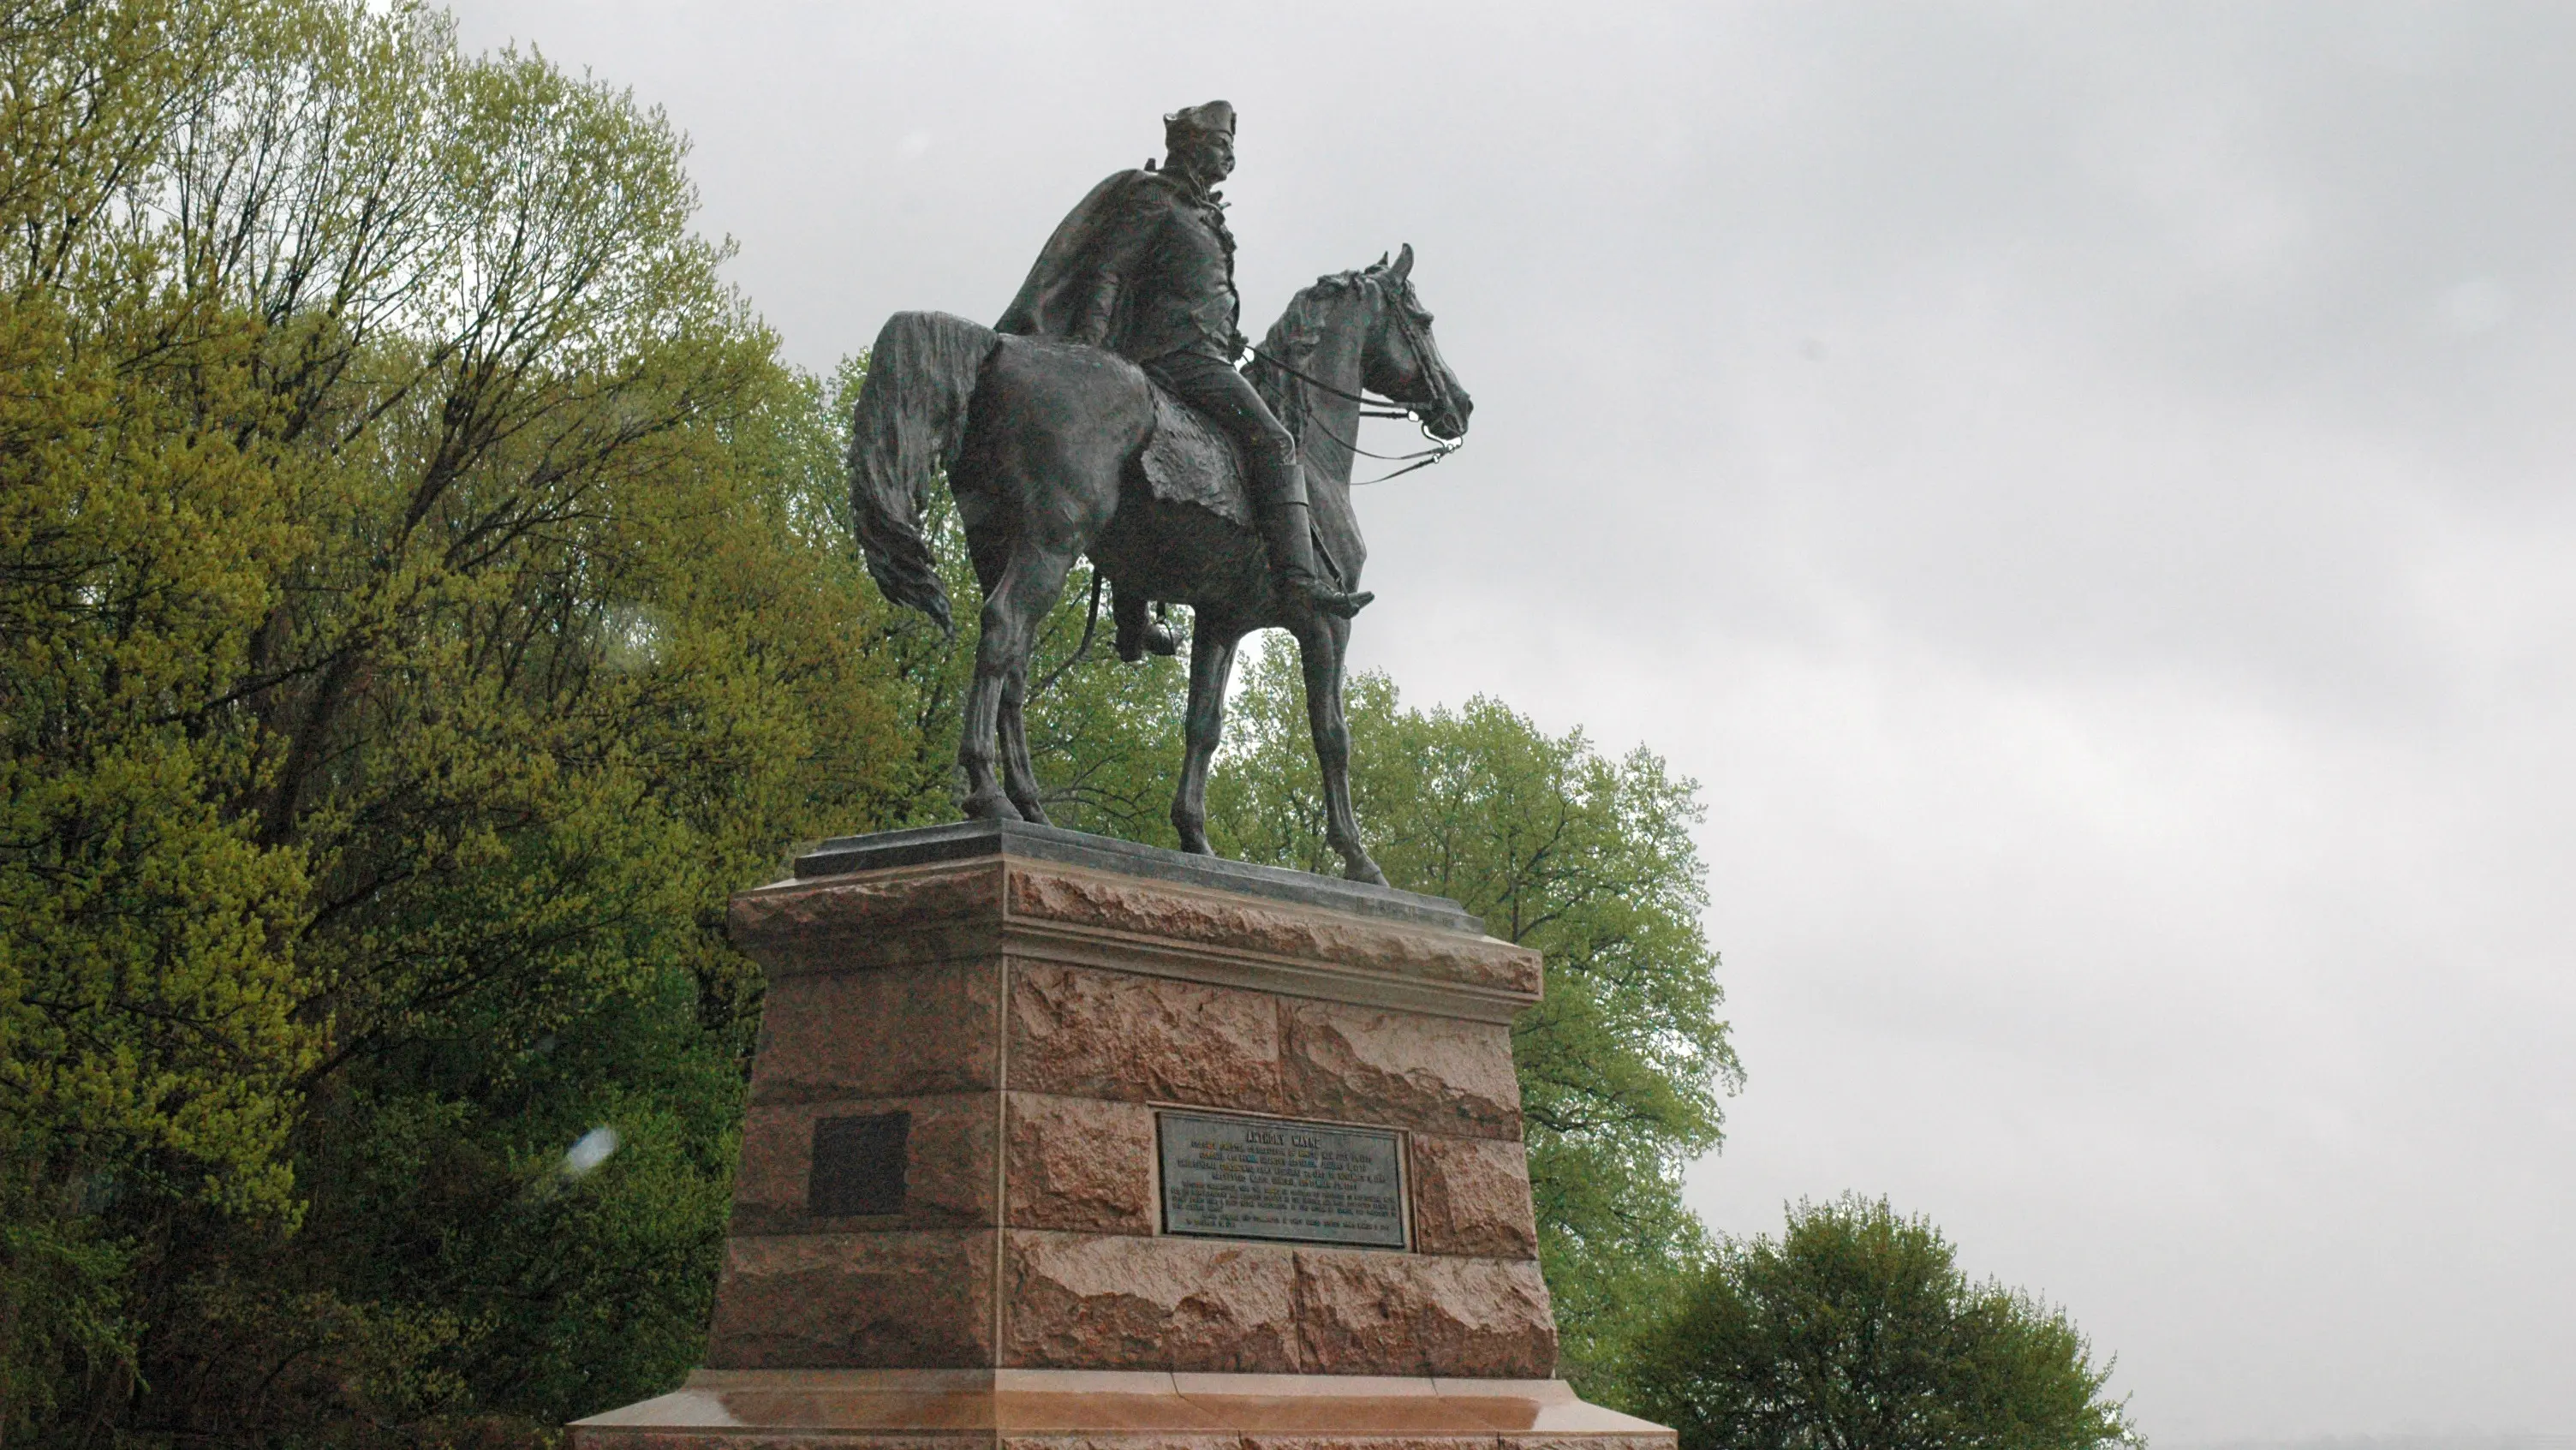 Patung Anthony Wayne di Valley Forge, AS (Wikimedia Commons)